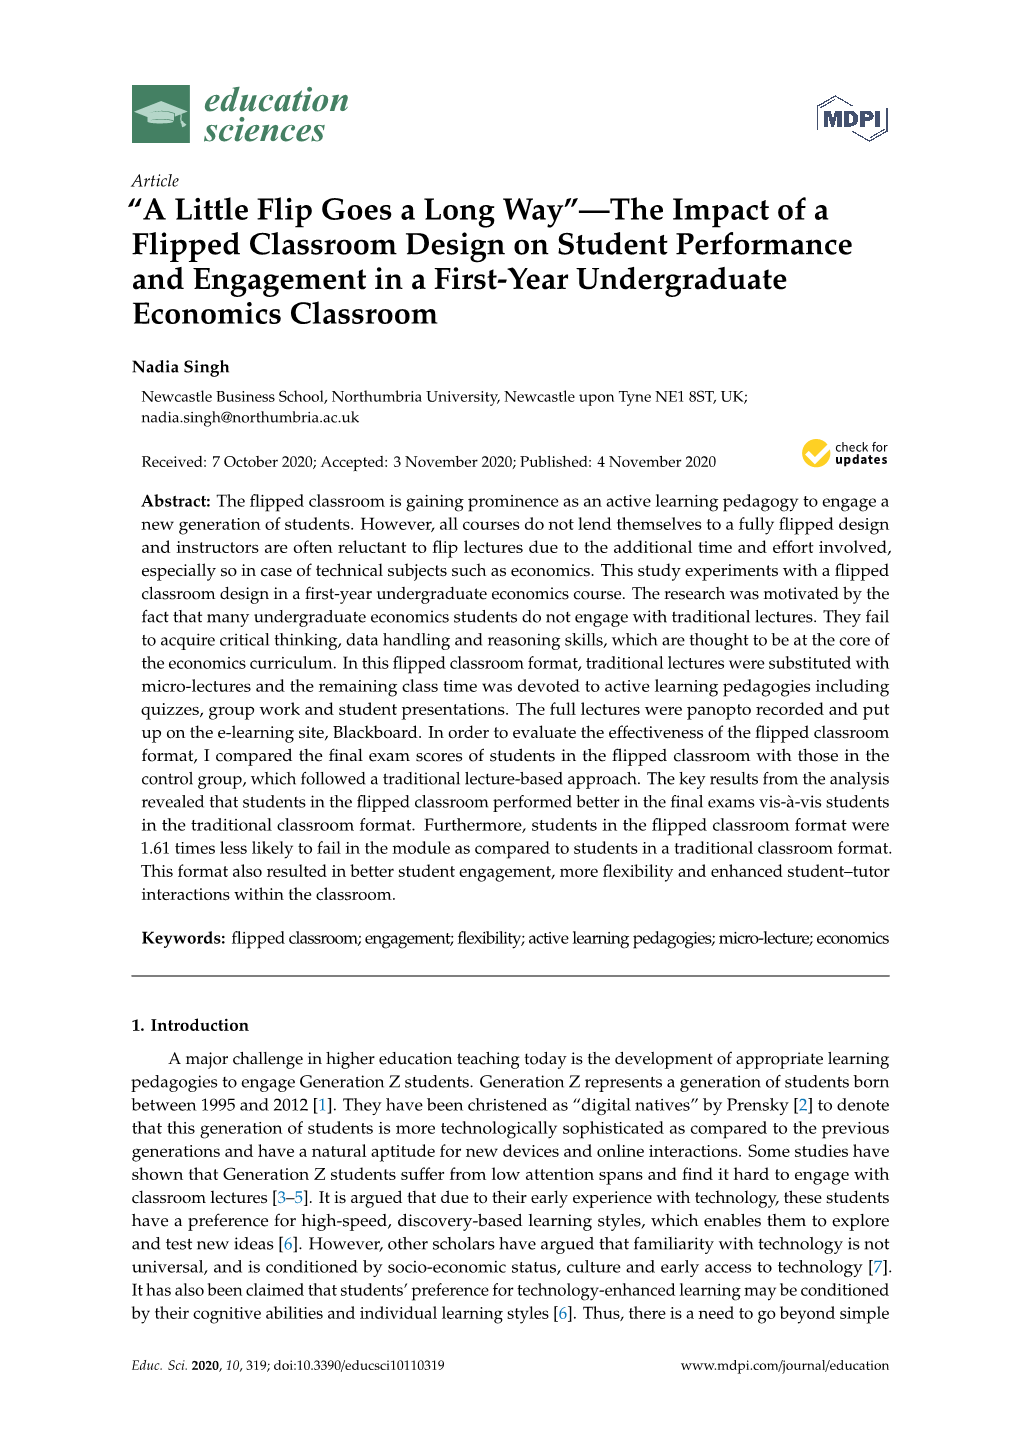 The Impact of a Flipped Classroom Design on Student Performance and Engagement in a First-Year Undergraduate Economics Classroom